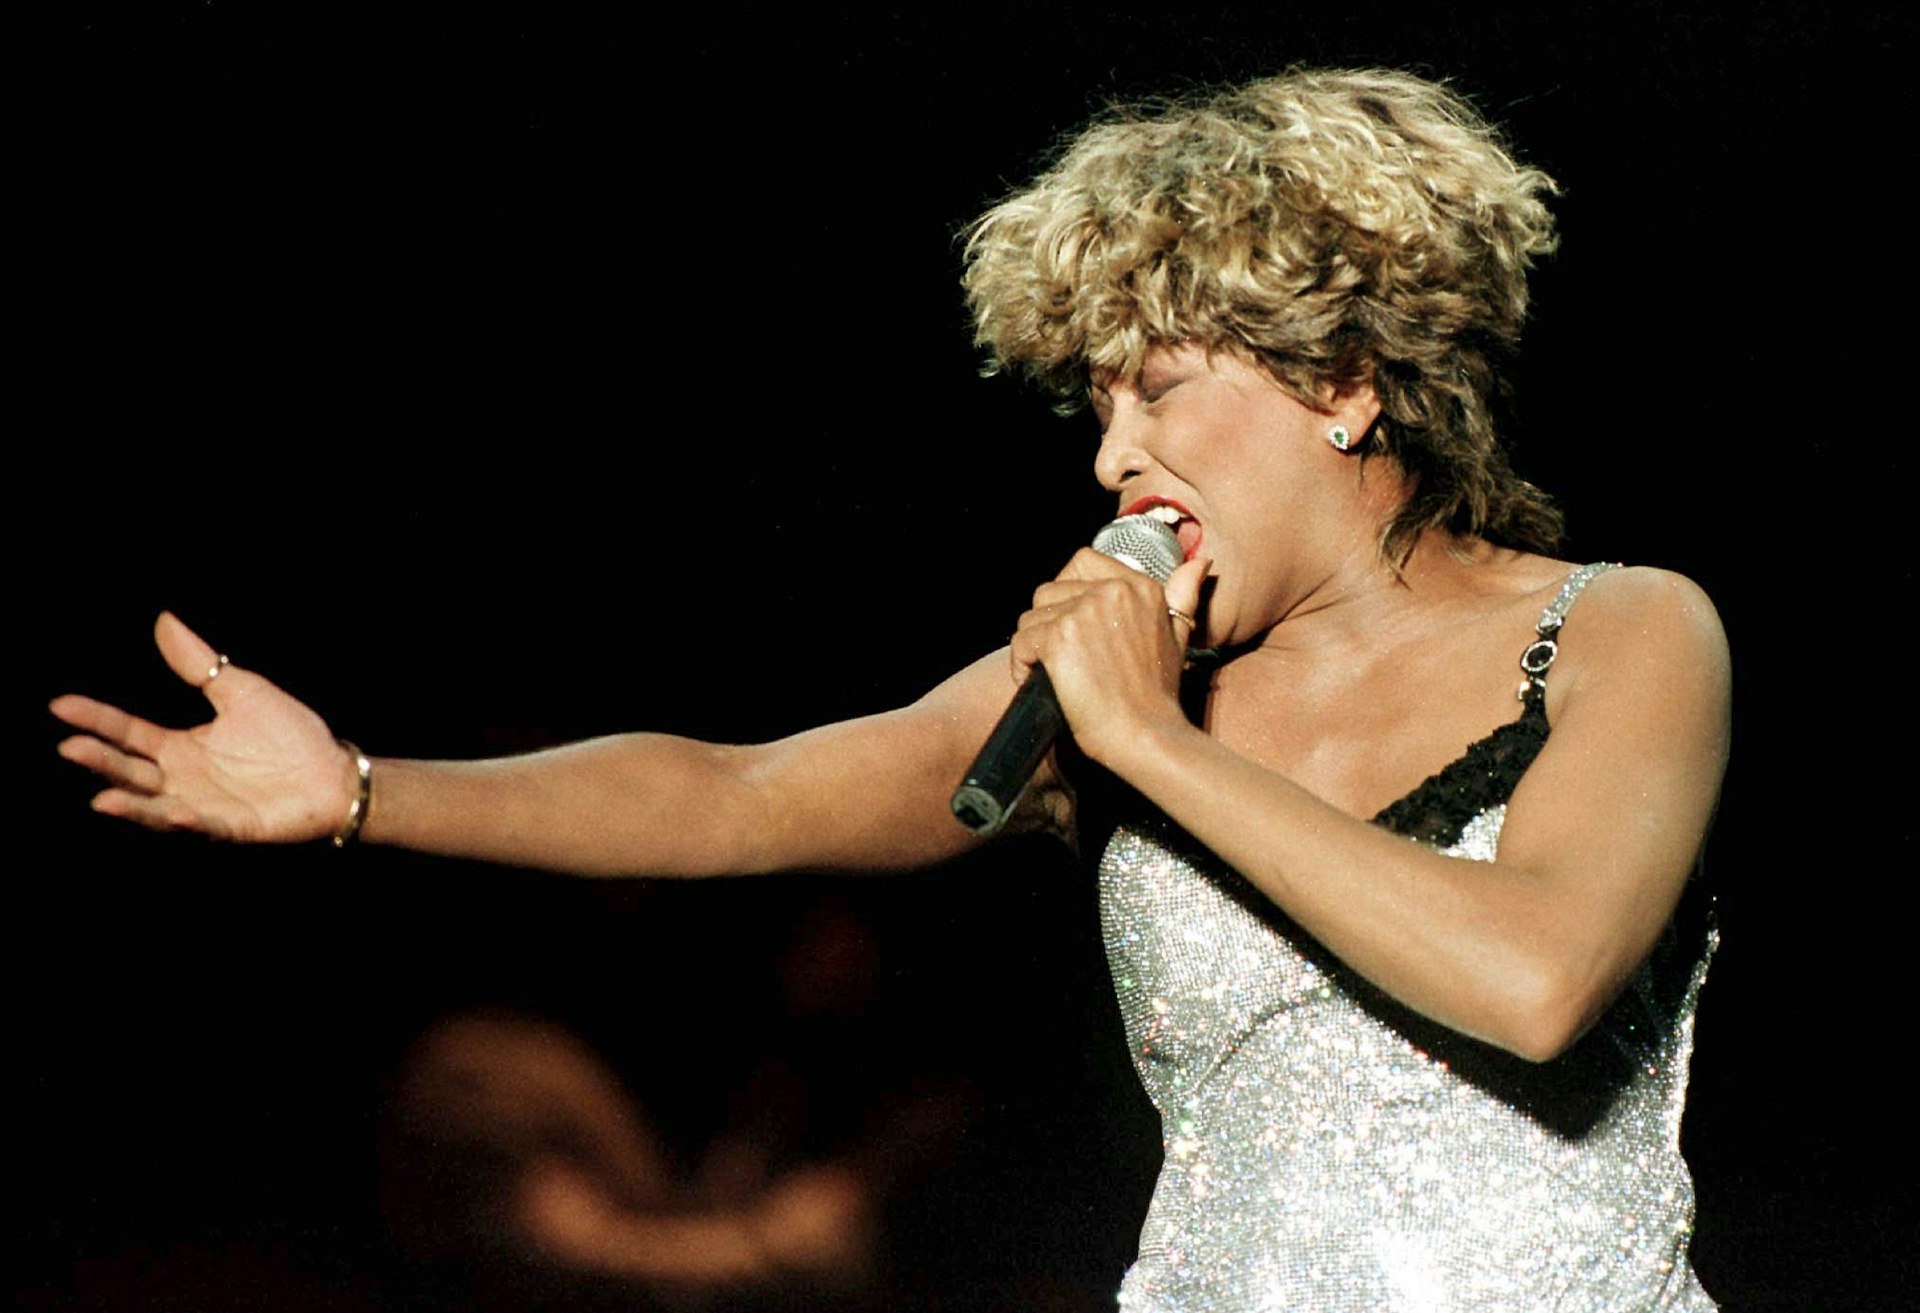 Tina Turner holds a microphone will performing on stage in a silver dress. 